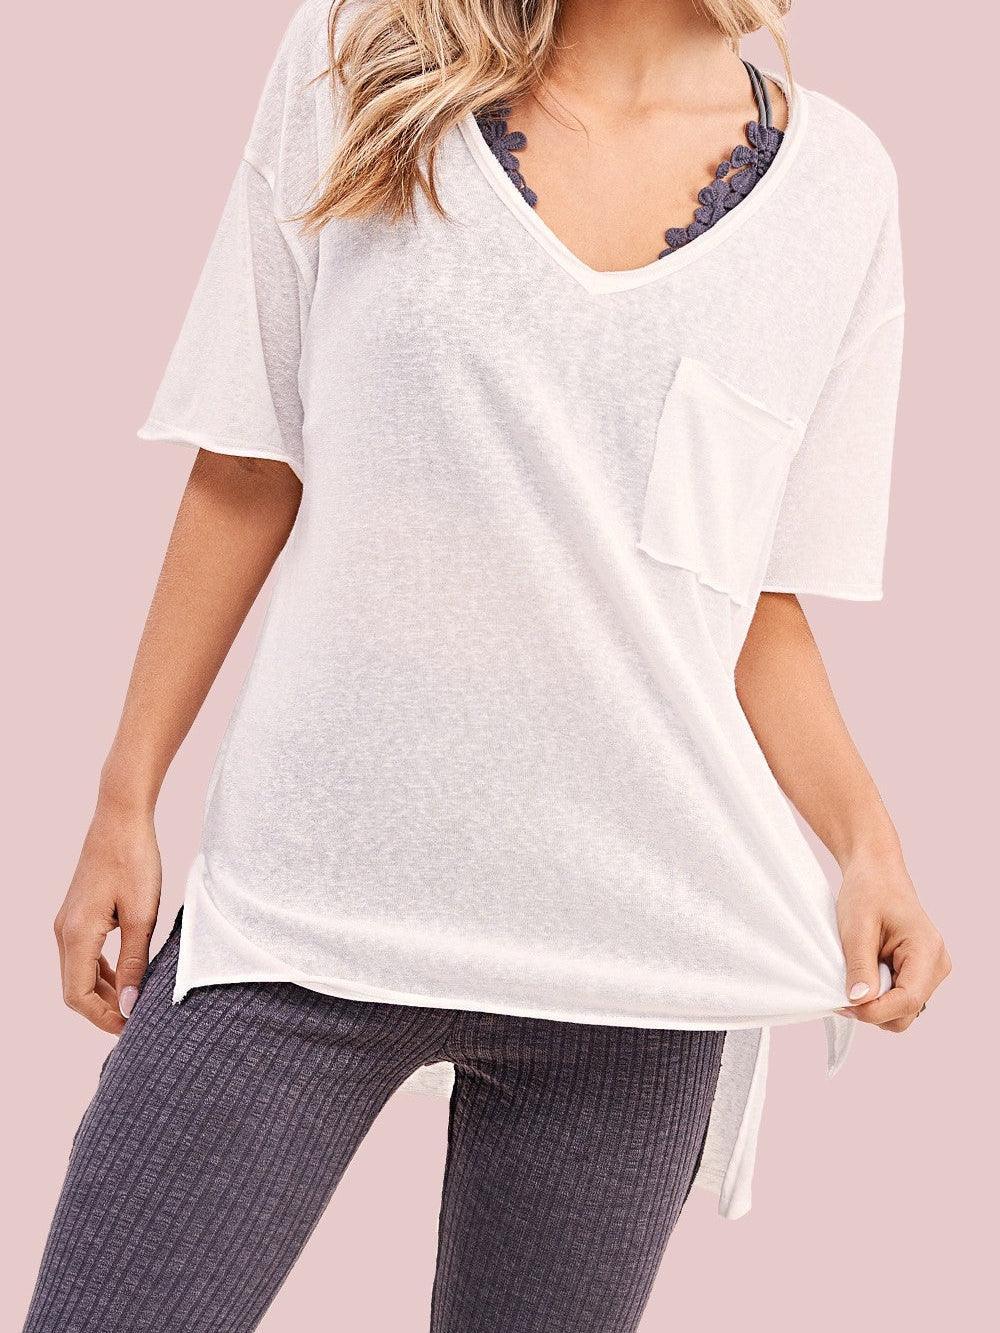 Perfect Tee Relaxed Fit Short Sleeve Top-Women's Clothing-Shop Z & Joxa